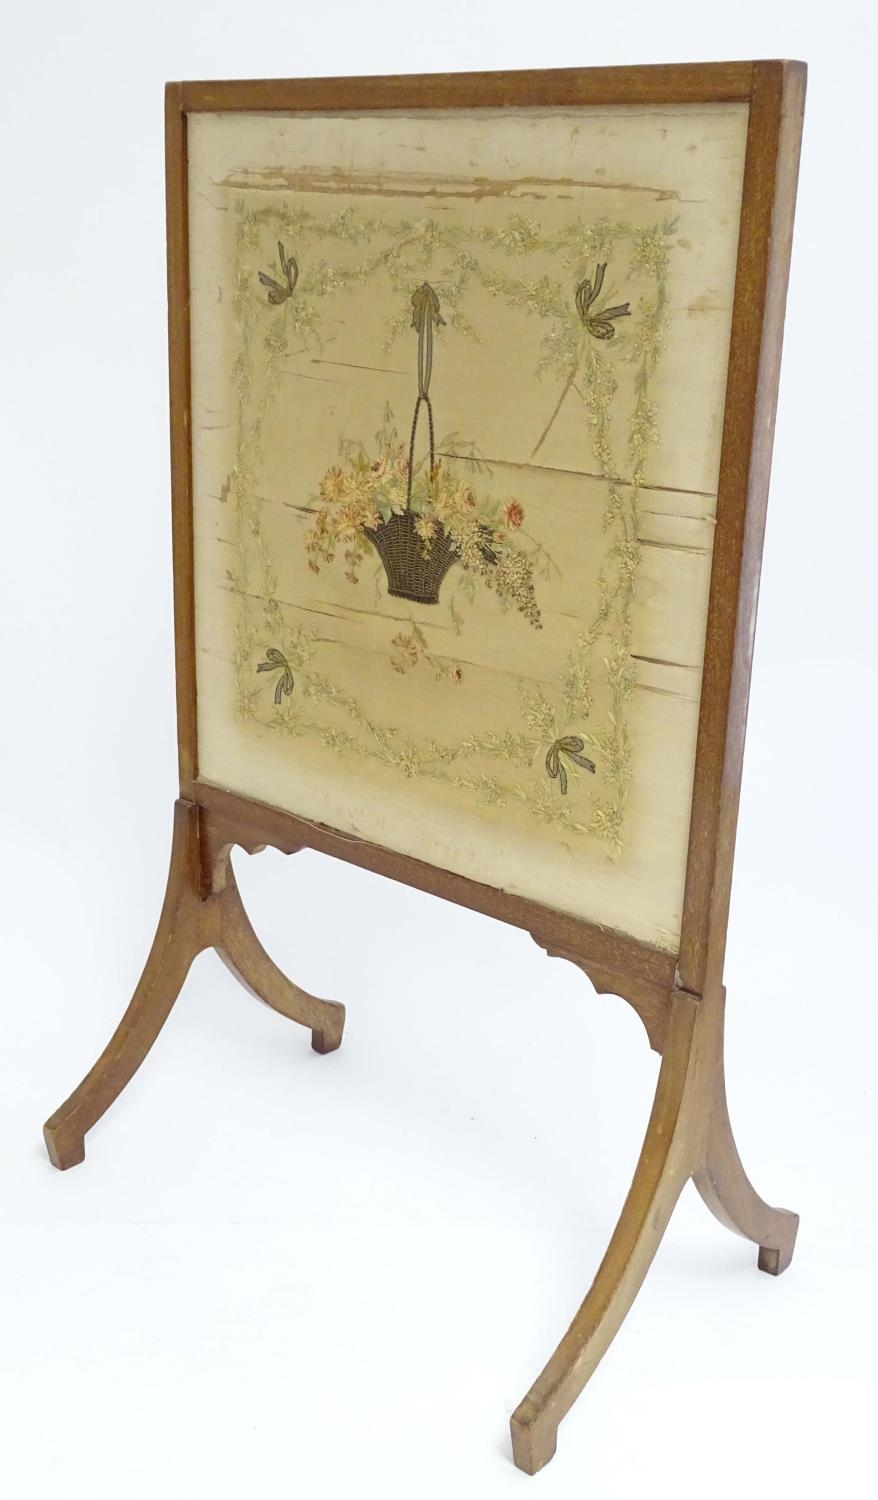 An early 19thC silk needlework with fine floral decoration, bows, swags and a woven basket in a - Image 4 of 10